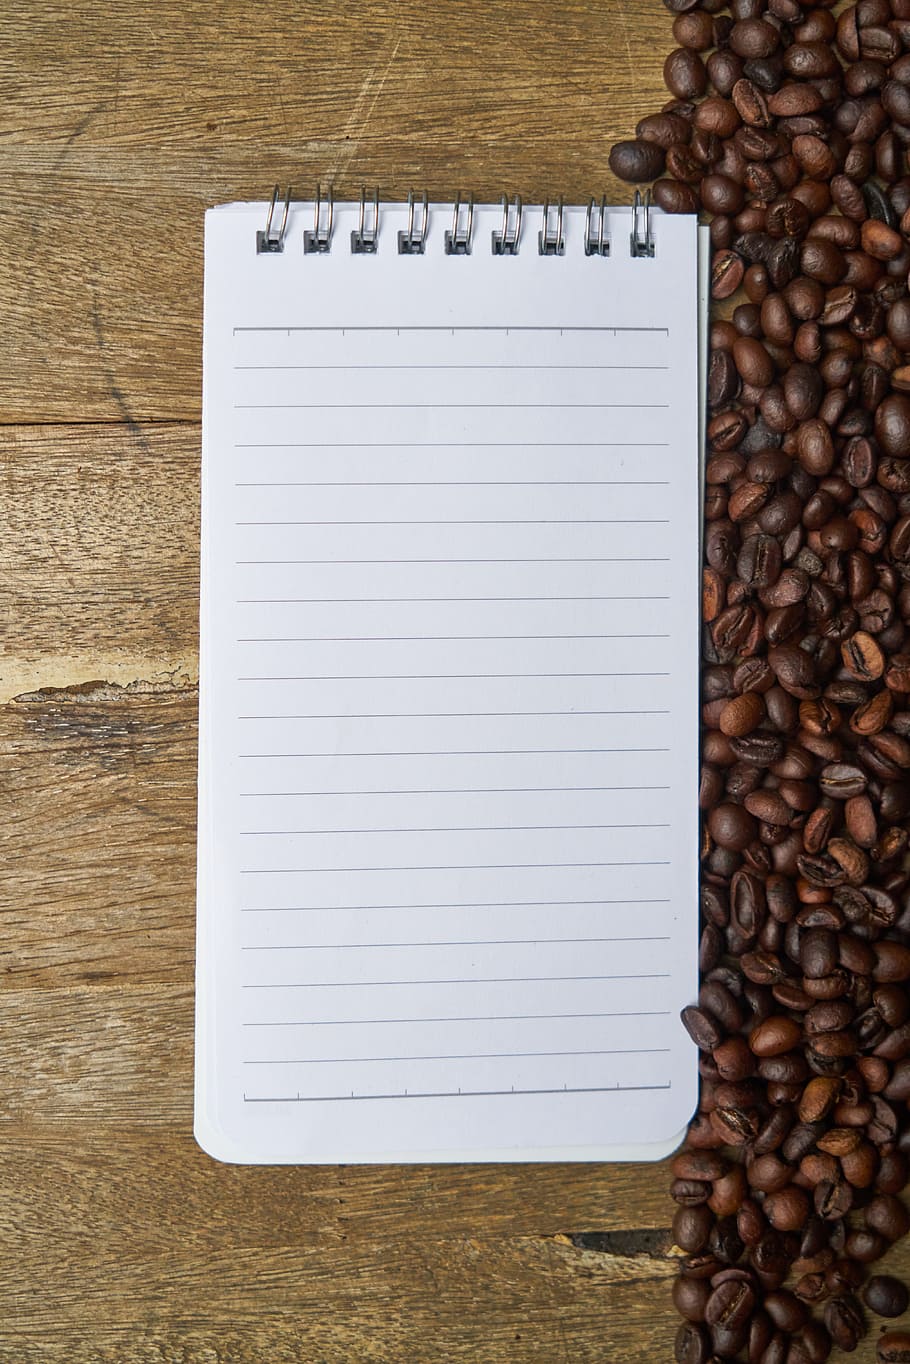 notebook, coffee, course, the work, espresso, coffee bean, kernels